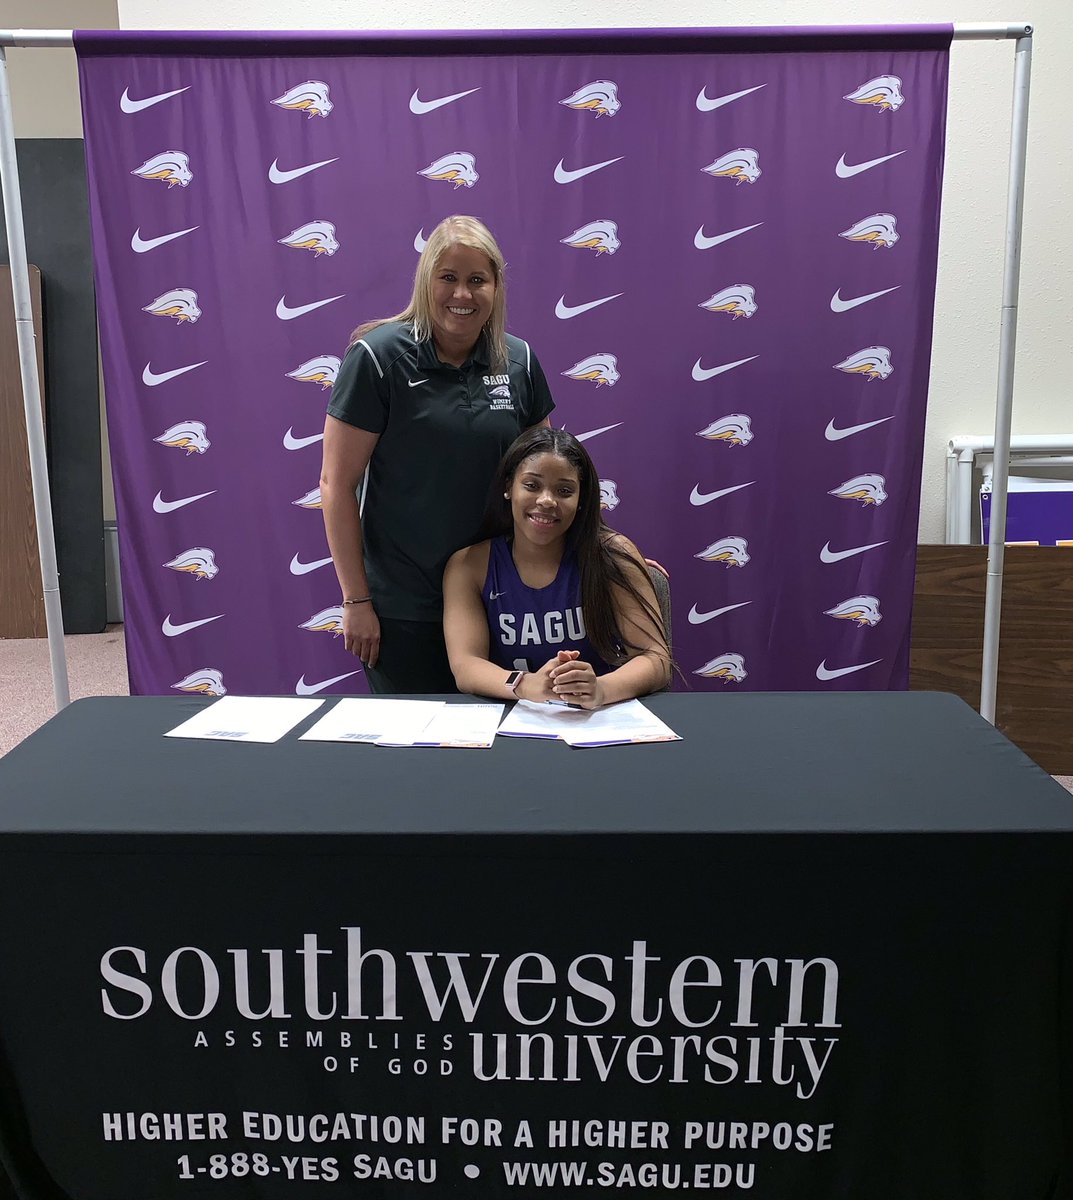 It’s OFFICIAL!! Welcome Alexis Casher to the SAGU Women’s basketball program!